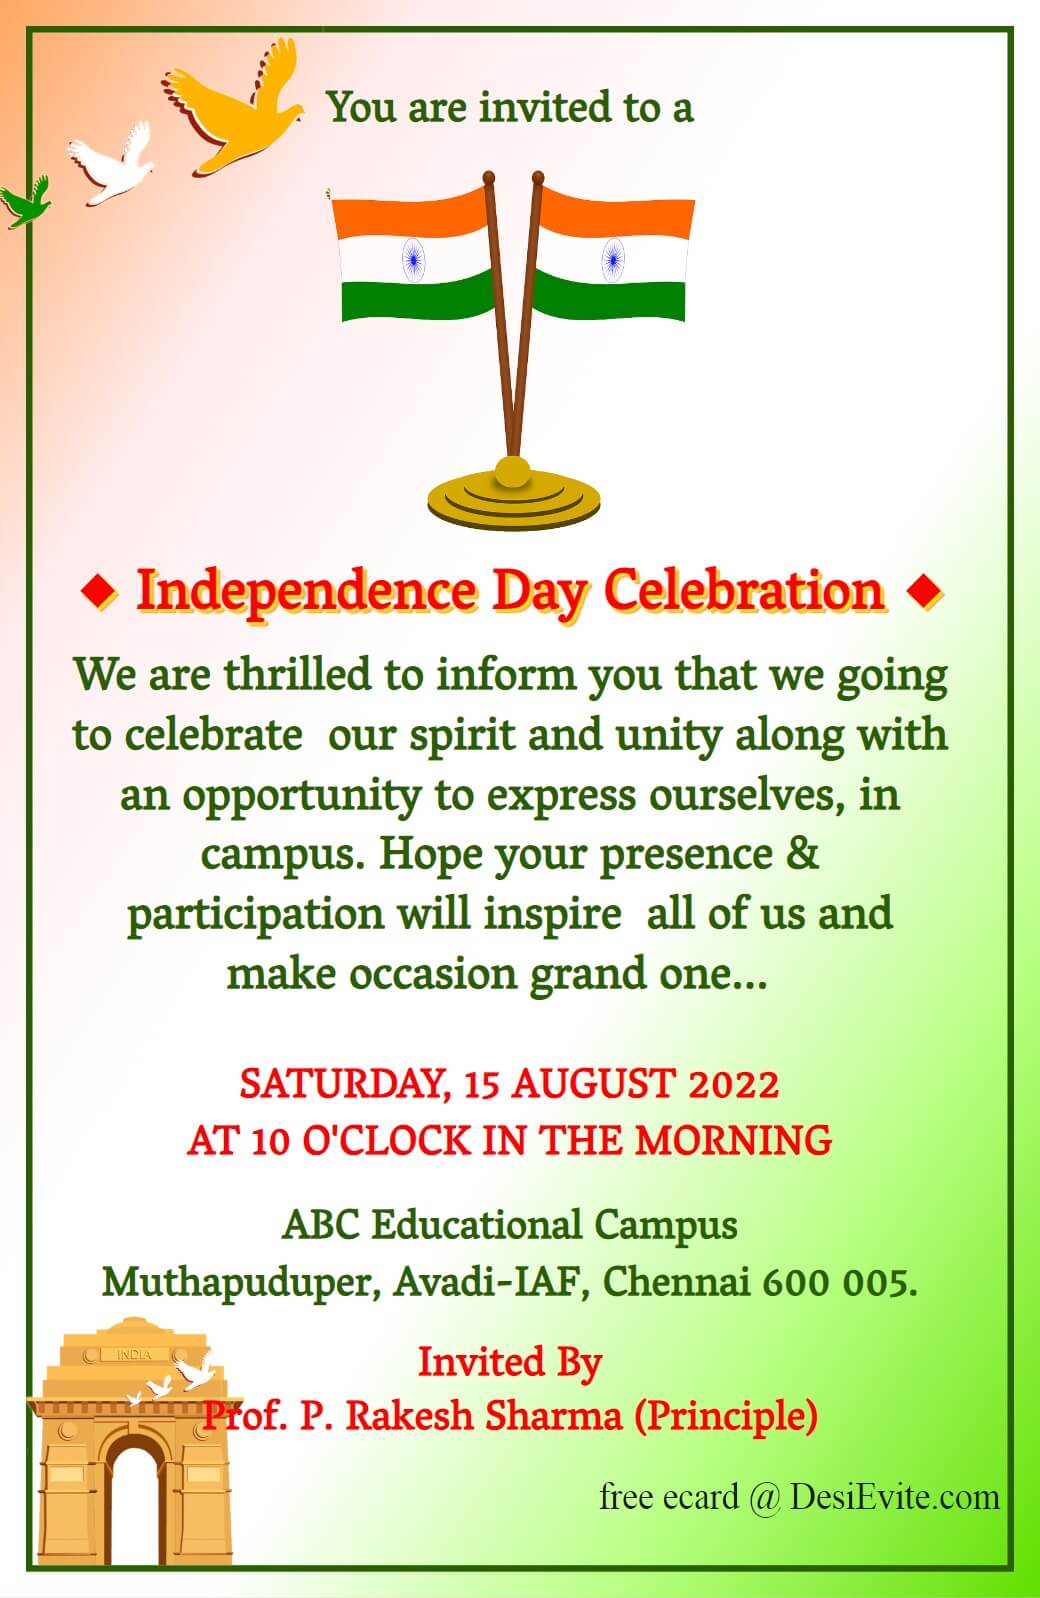 independence day invitation ecard free without watermark 101 